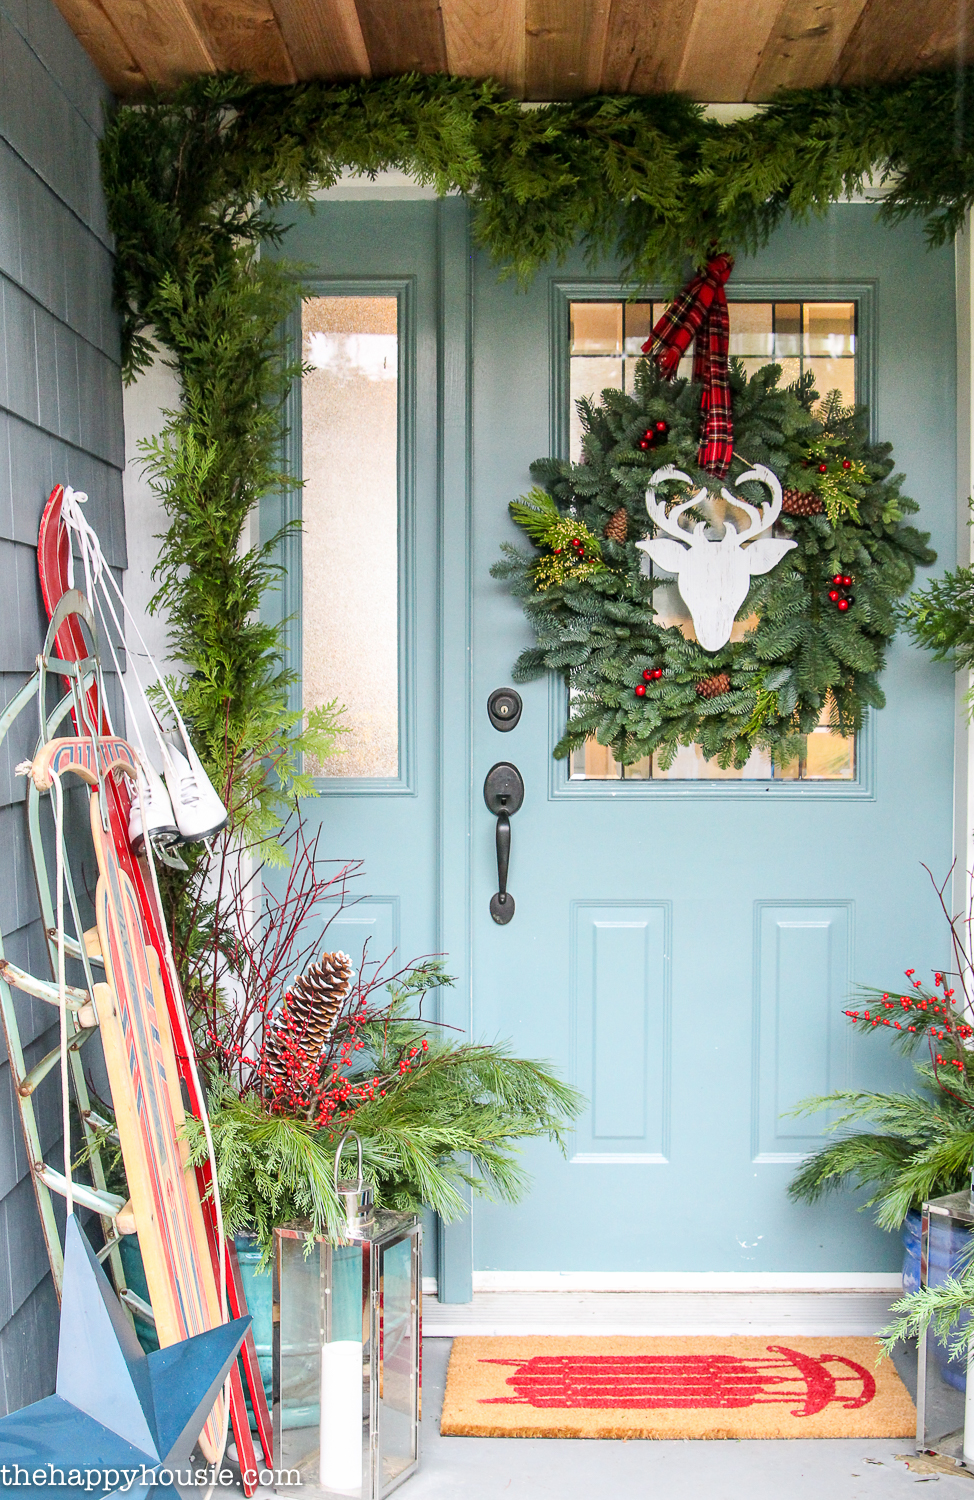 The front door with a green wreath and a deer and antler image.